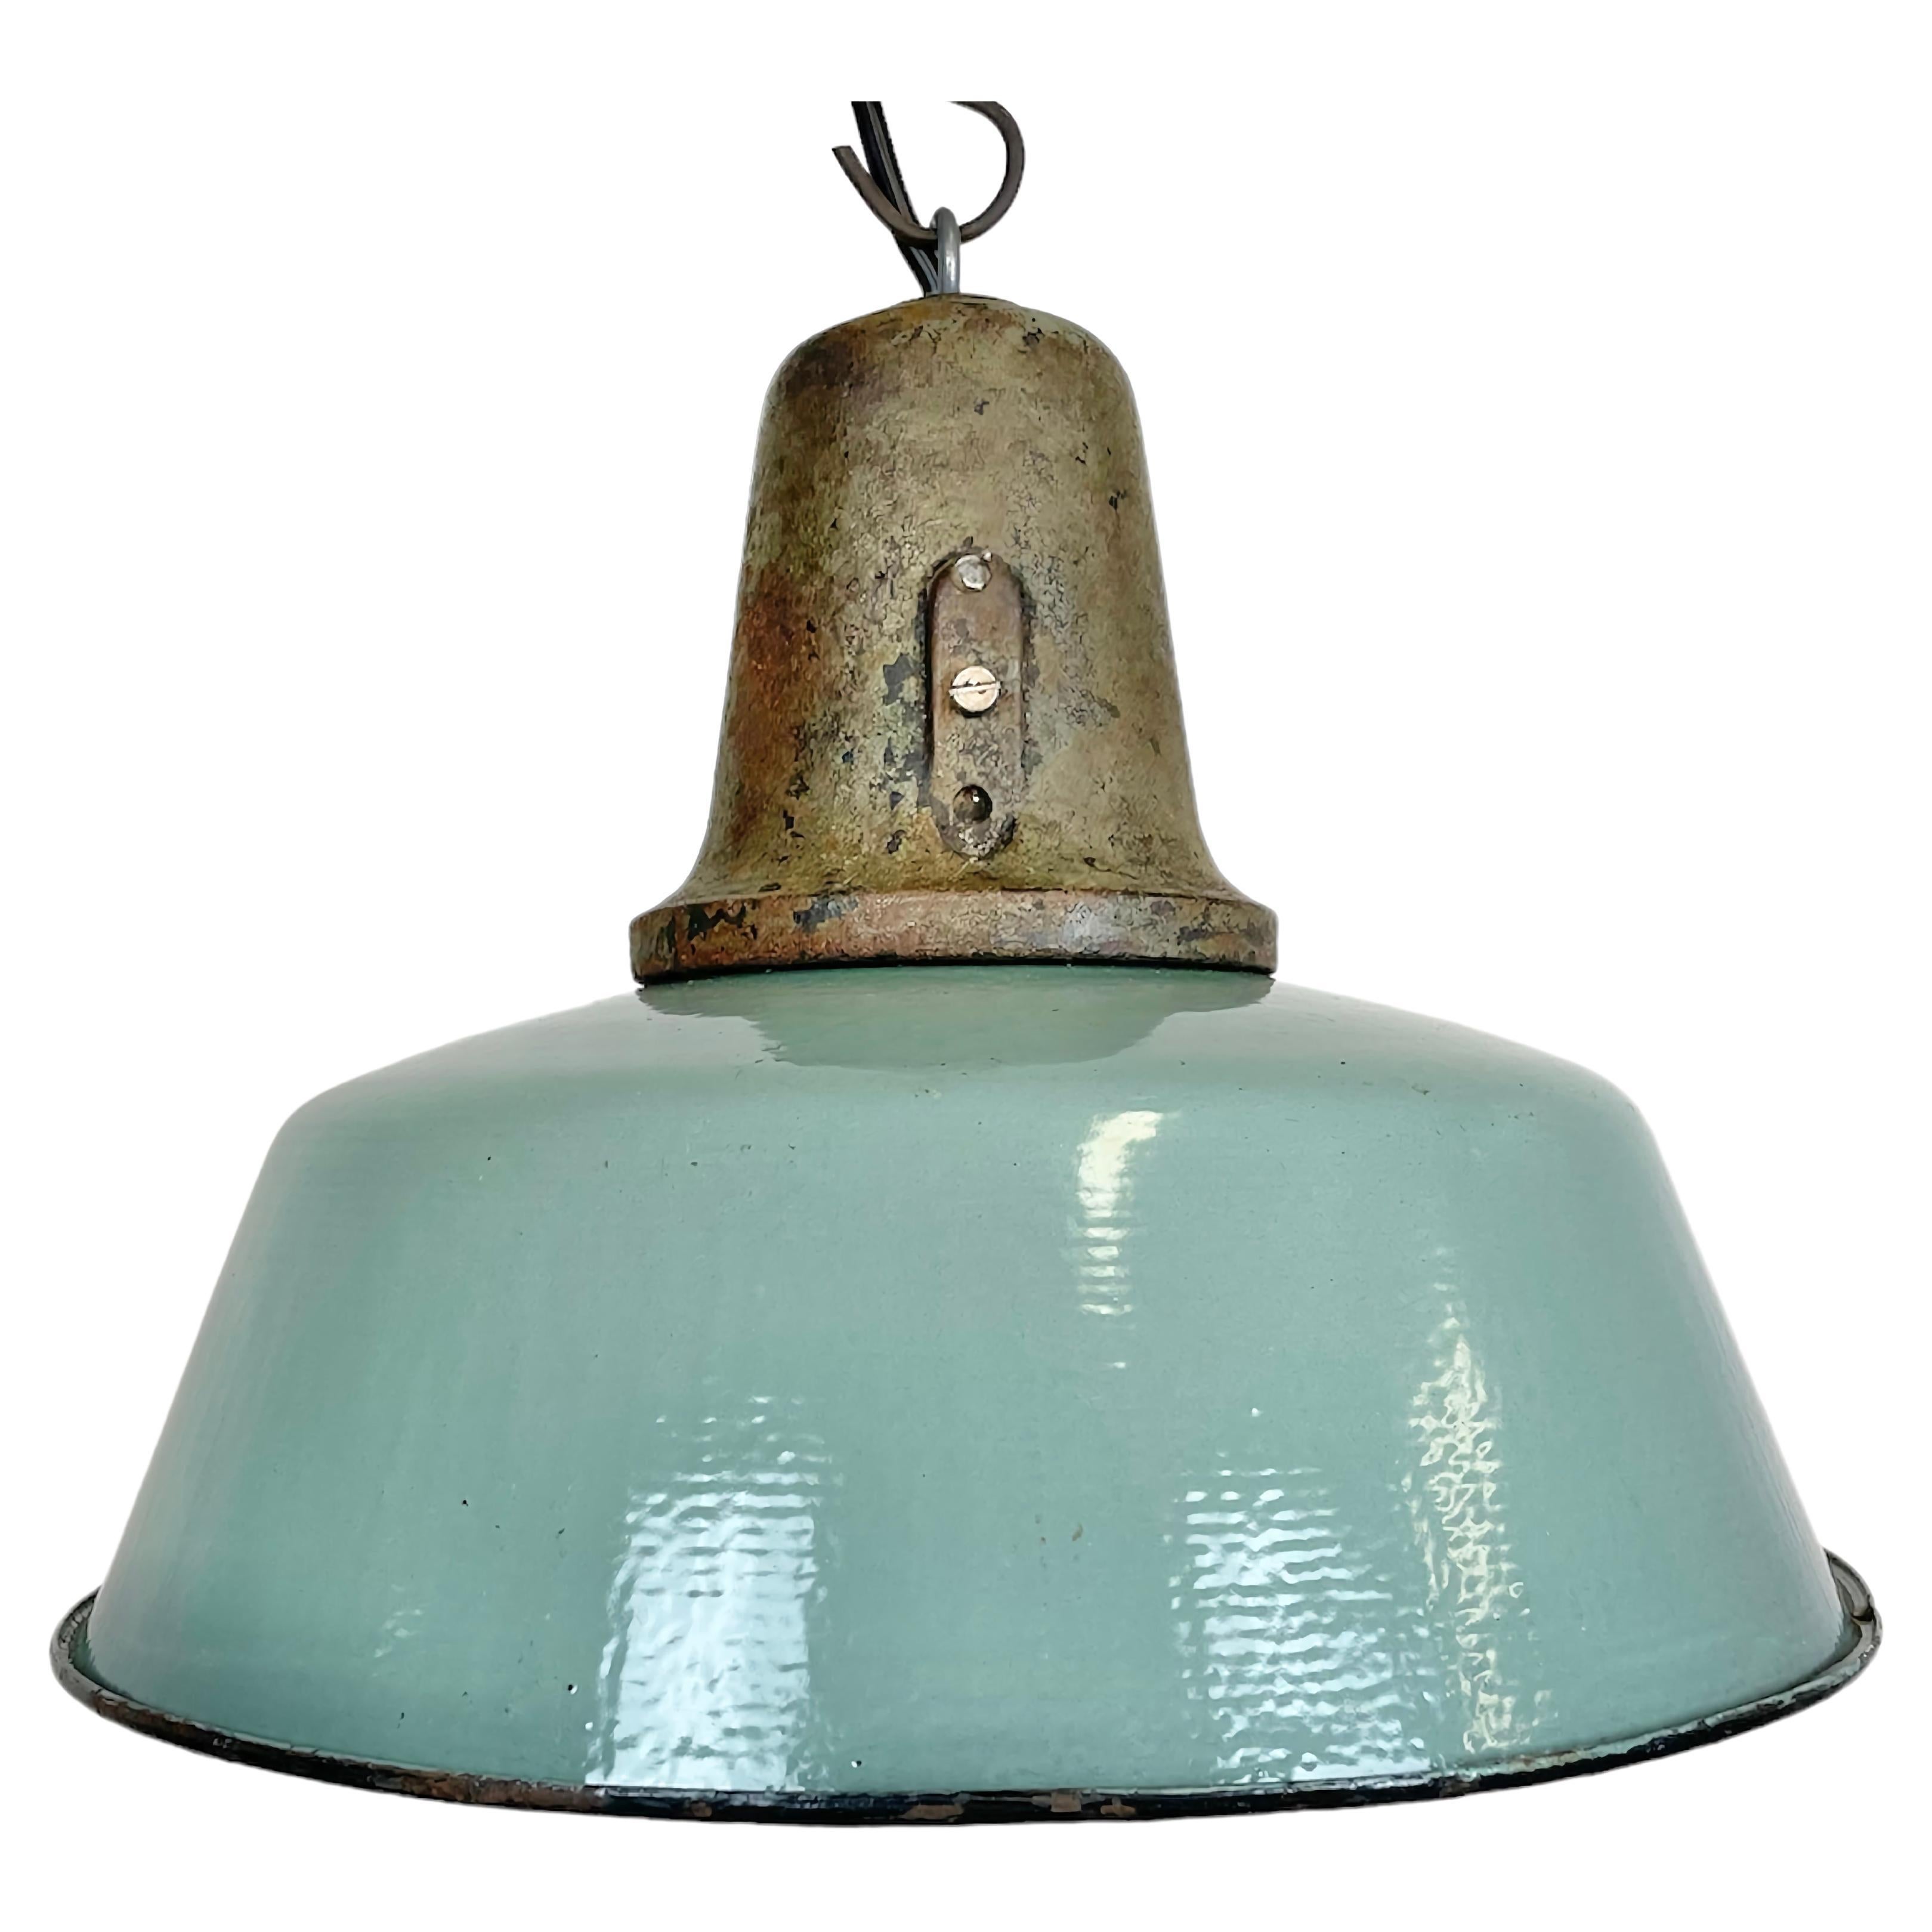 Industrial Petrol Enamel Factory Lamp with Cast Iron Top, 1960s